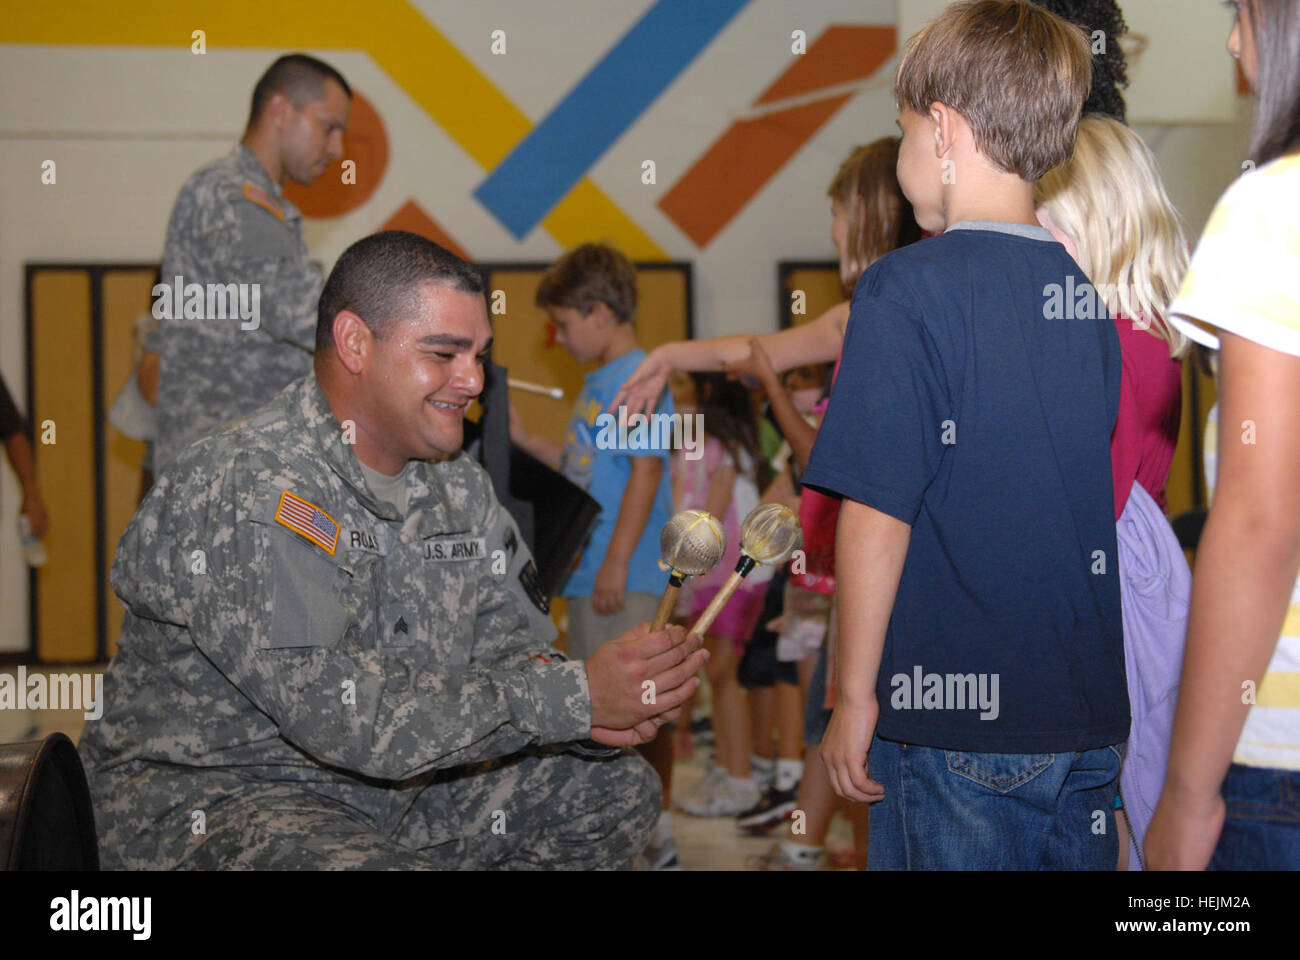 GUANTANAMO BAY, Cuba – Army Sgt. Jose Rojas and Army Staff Sgt. William Cruz, assigned to Joint Task Force Guantanamo and members of Puerto Rican Fever, an all-Soldier steel drum band, display their steel drums and allow students to play them after a performance at W.T. Sampson Elementary School, Oct. 6, 2009. The six-member steel drum band was asked to perform during Hispanic Heritage Month to educate and entertain the children and teach them about Hispanic music and culture. JTF Guantanamo conducts safe, humane, legal and transparent care and custody of detainees, including those convicted b Stock Photo